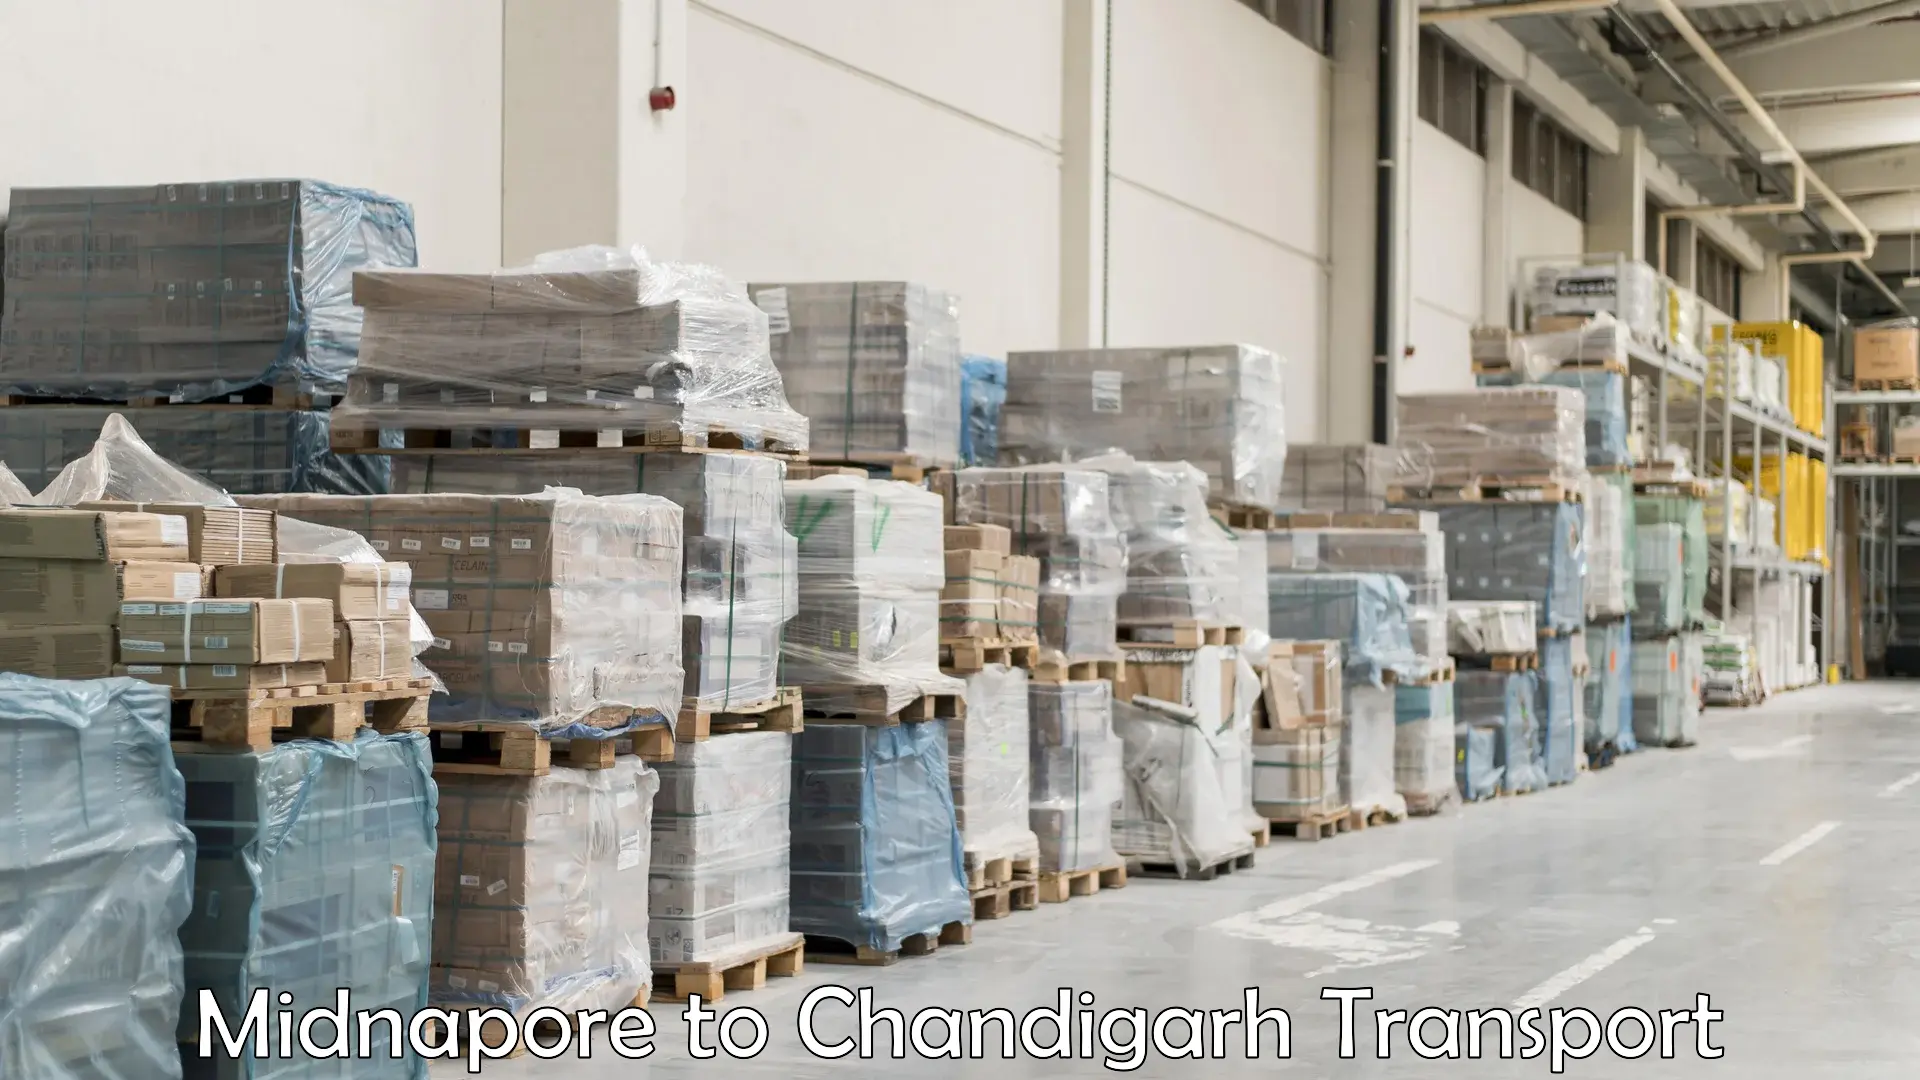 Furniture transport service Midnapore to Chandigarh